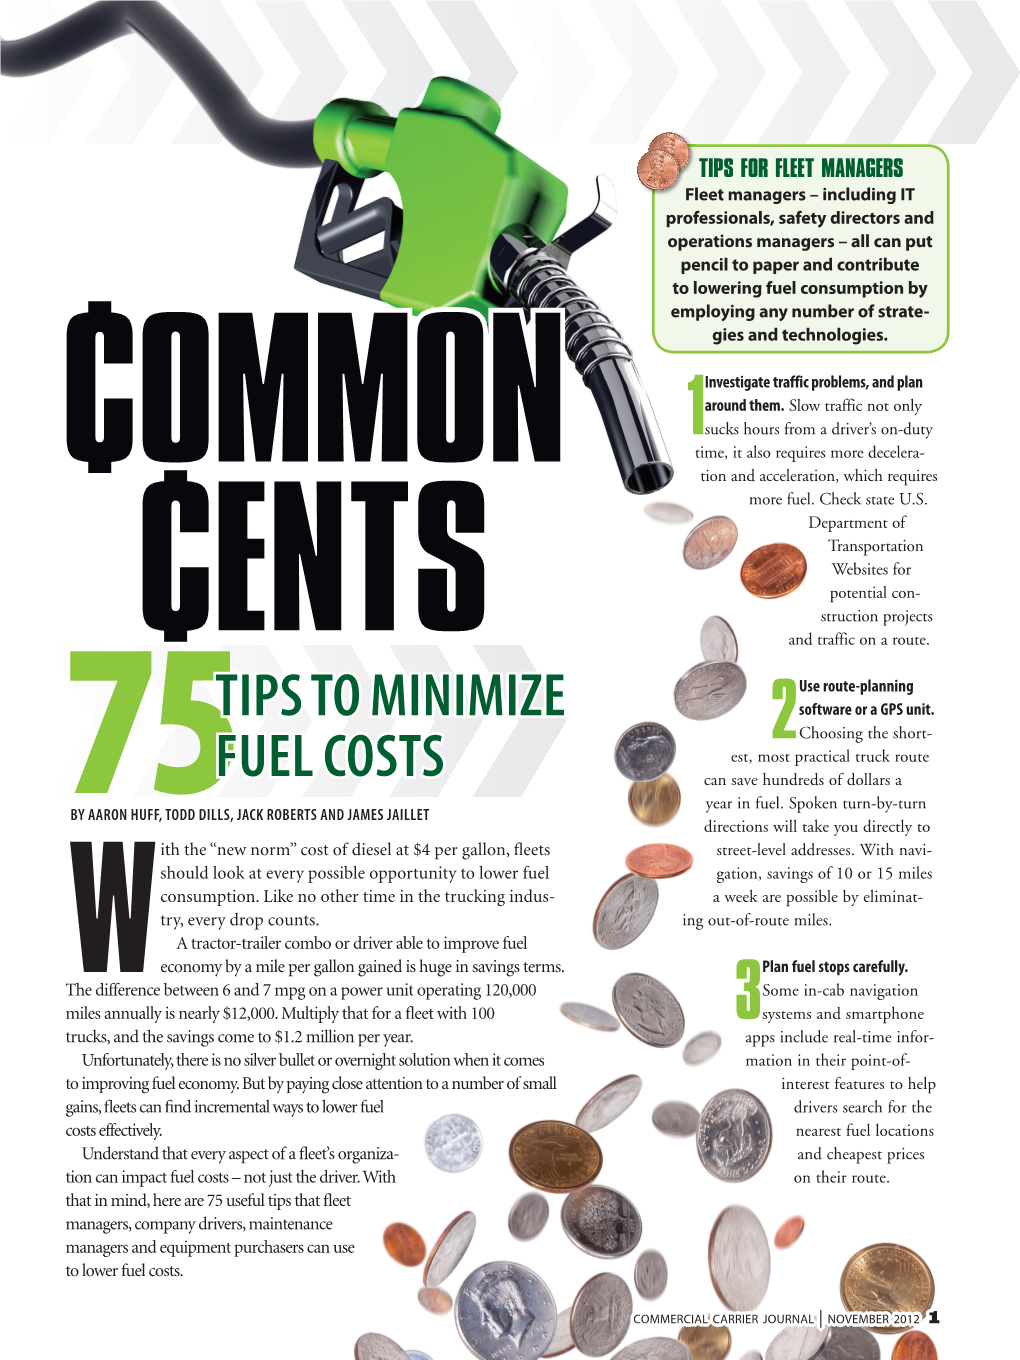 Tips to Minimize Fuel Costs